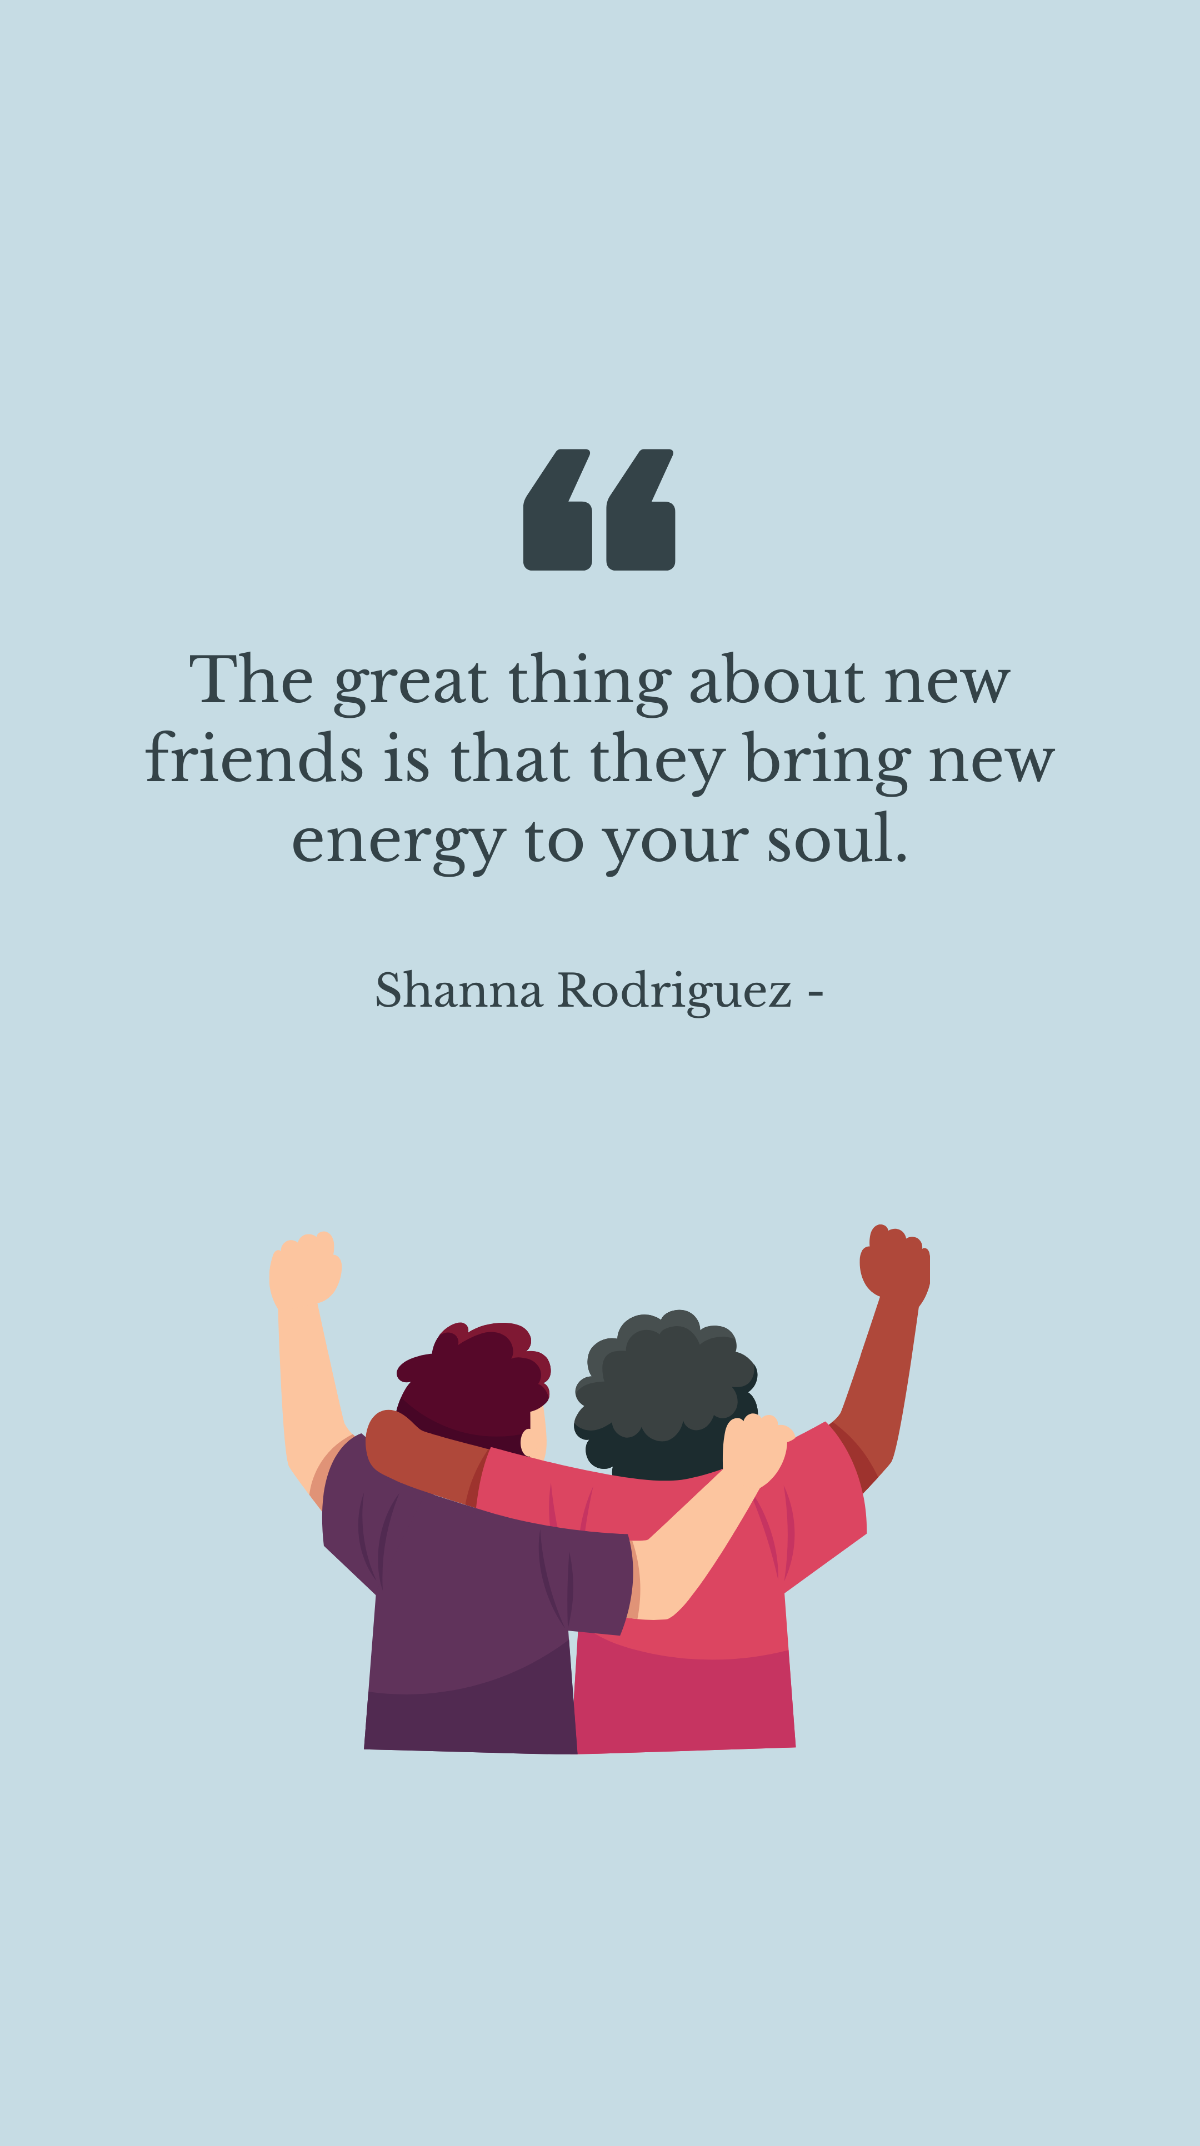 Shanna Rodriguez - The great thing about new friends is that they bring new energy to your soul. Template